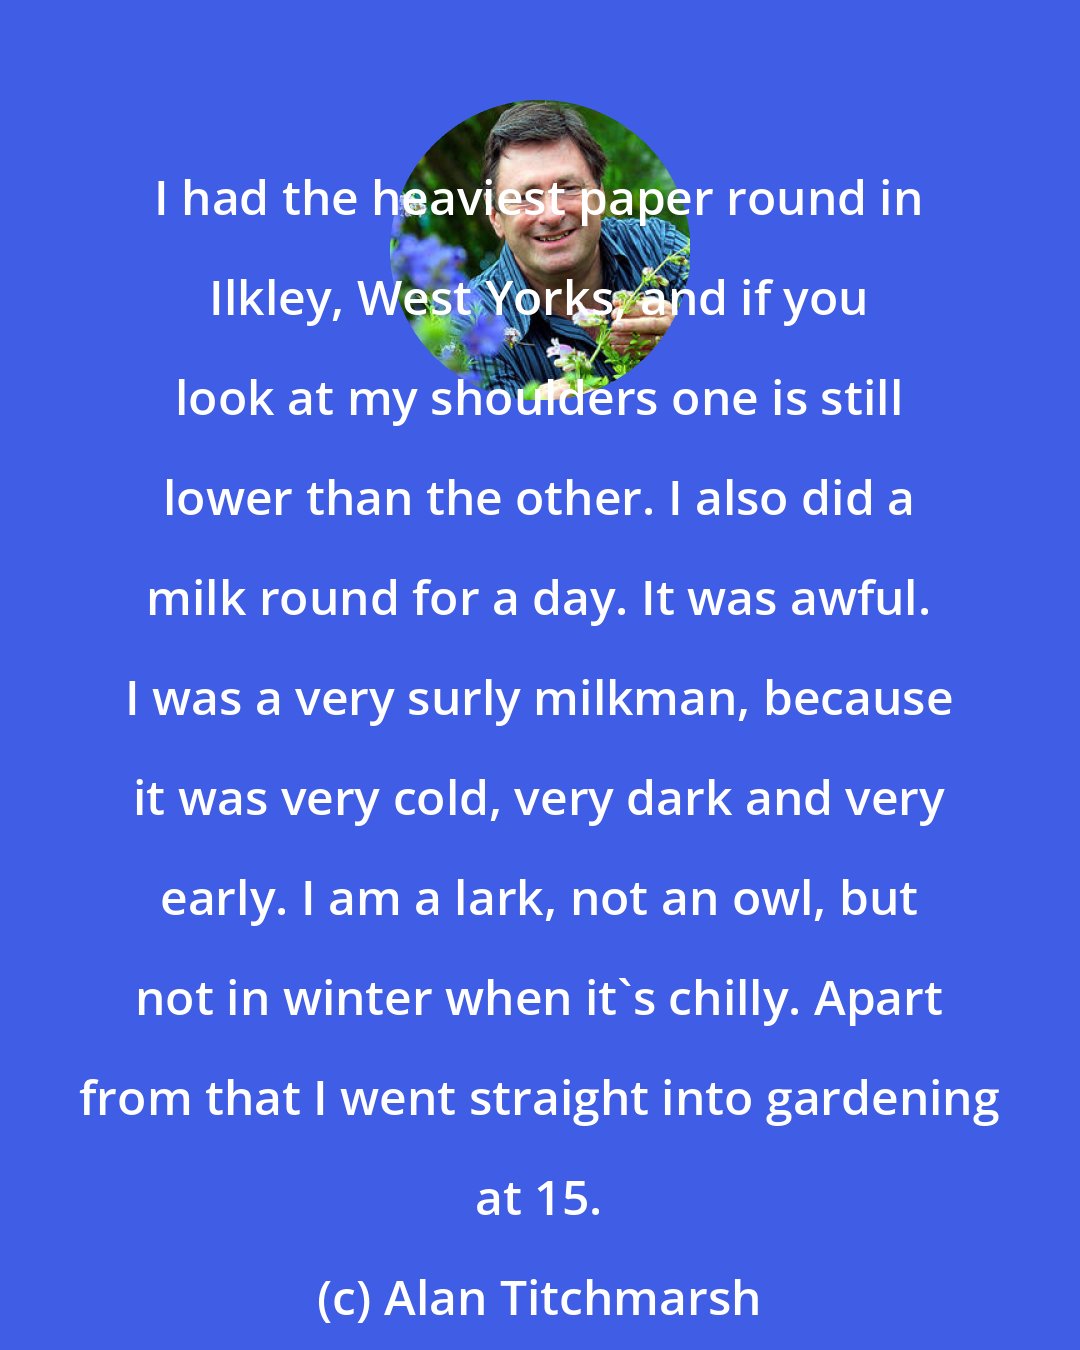 Alan Titchmarsh: I had the heaviest paper round in Ilkley, West Yorks, and if you look at my shoulders one is still lower than the other. I also did a milk round for a day. It was awful. I was a very surly milkman, because it was very cold, very dark and very early. I am a lark, not an owl, but not in winter when it's chilly. Apart from that I went straight into gardening at 15.